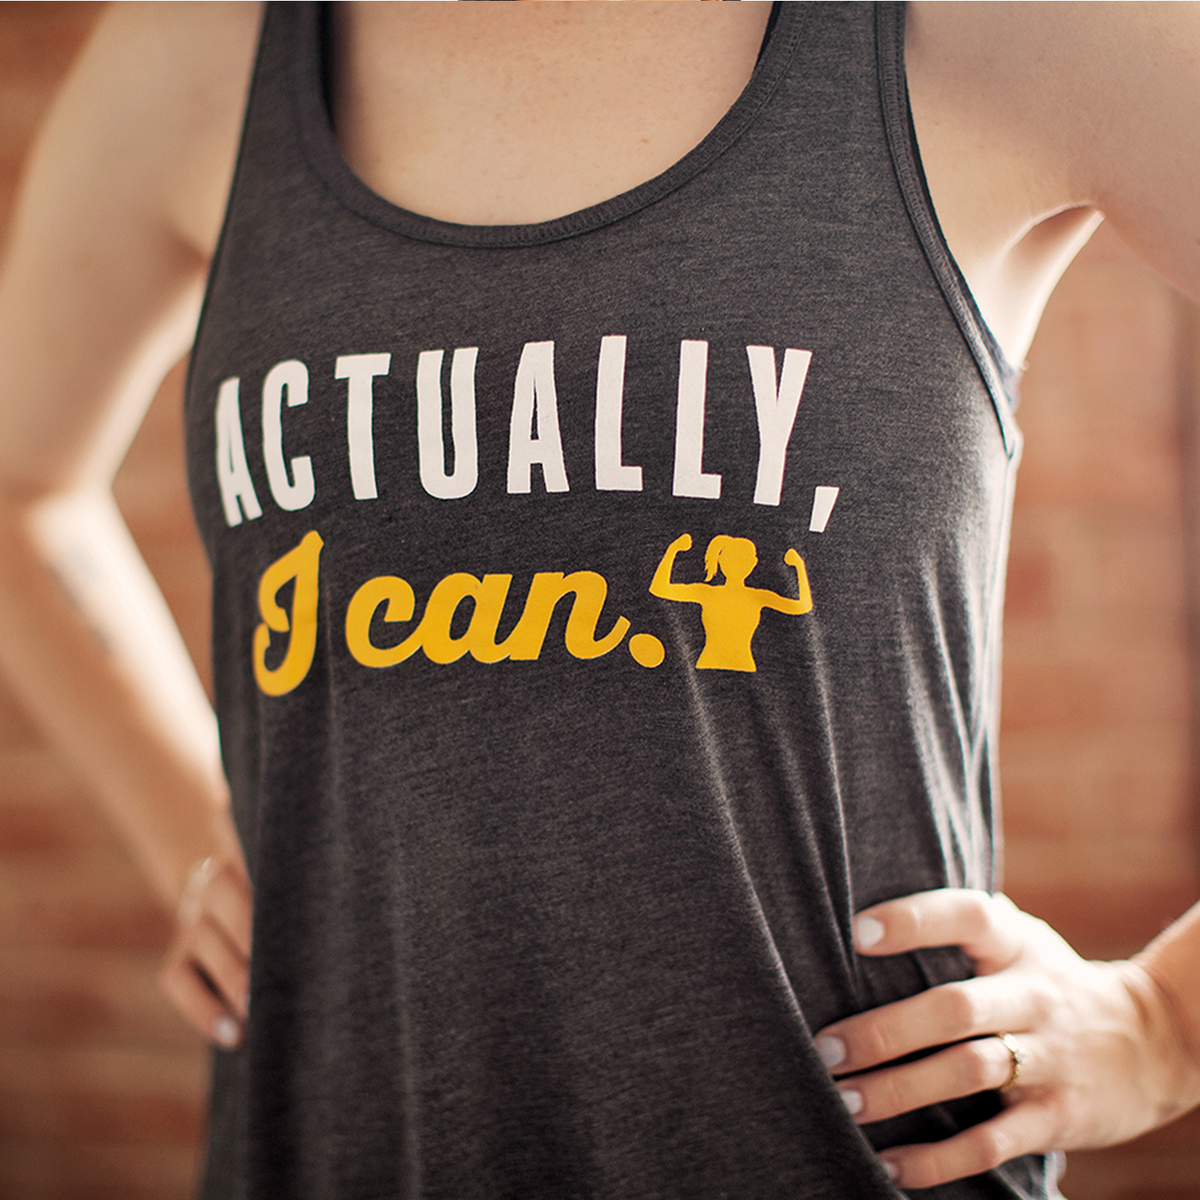 Exercise Tank Top for Women, Gym Tank, Cute Gym Shirt, Workout Tee, Workout  Tanks for Women, Workout Shirts, Fitness Motivation Gift, Tank -  Canada